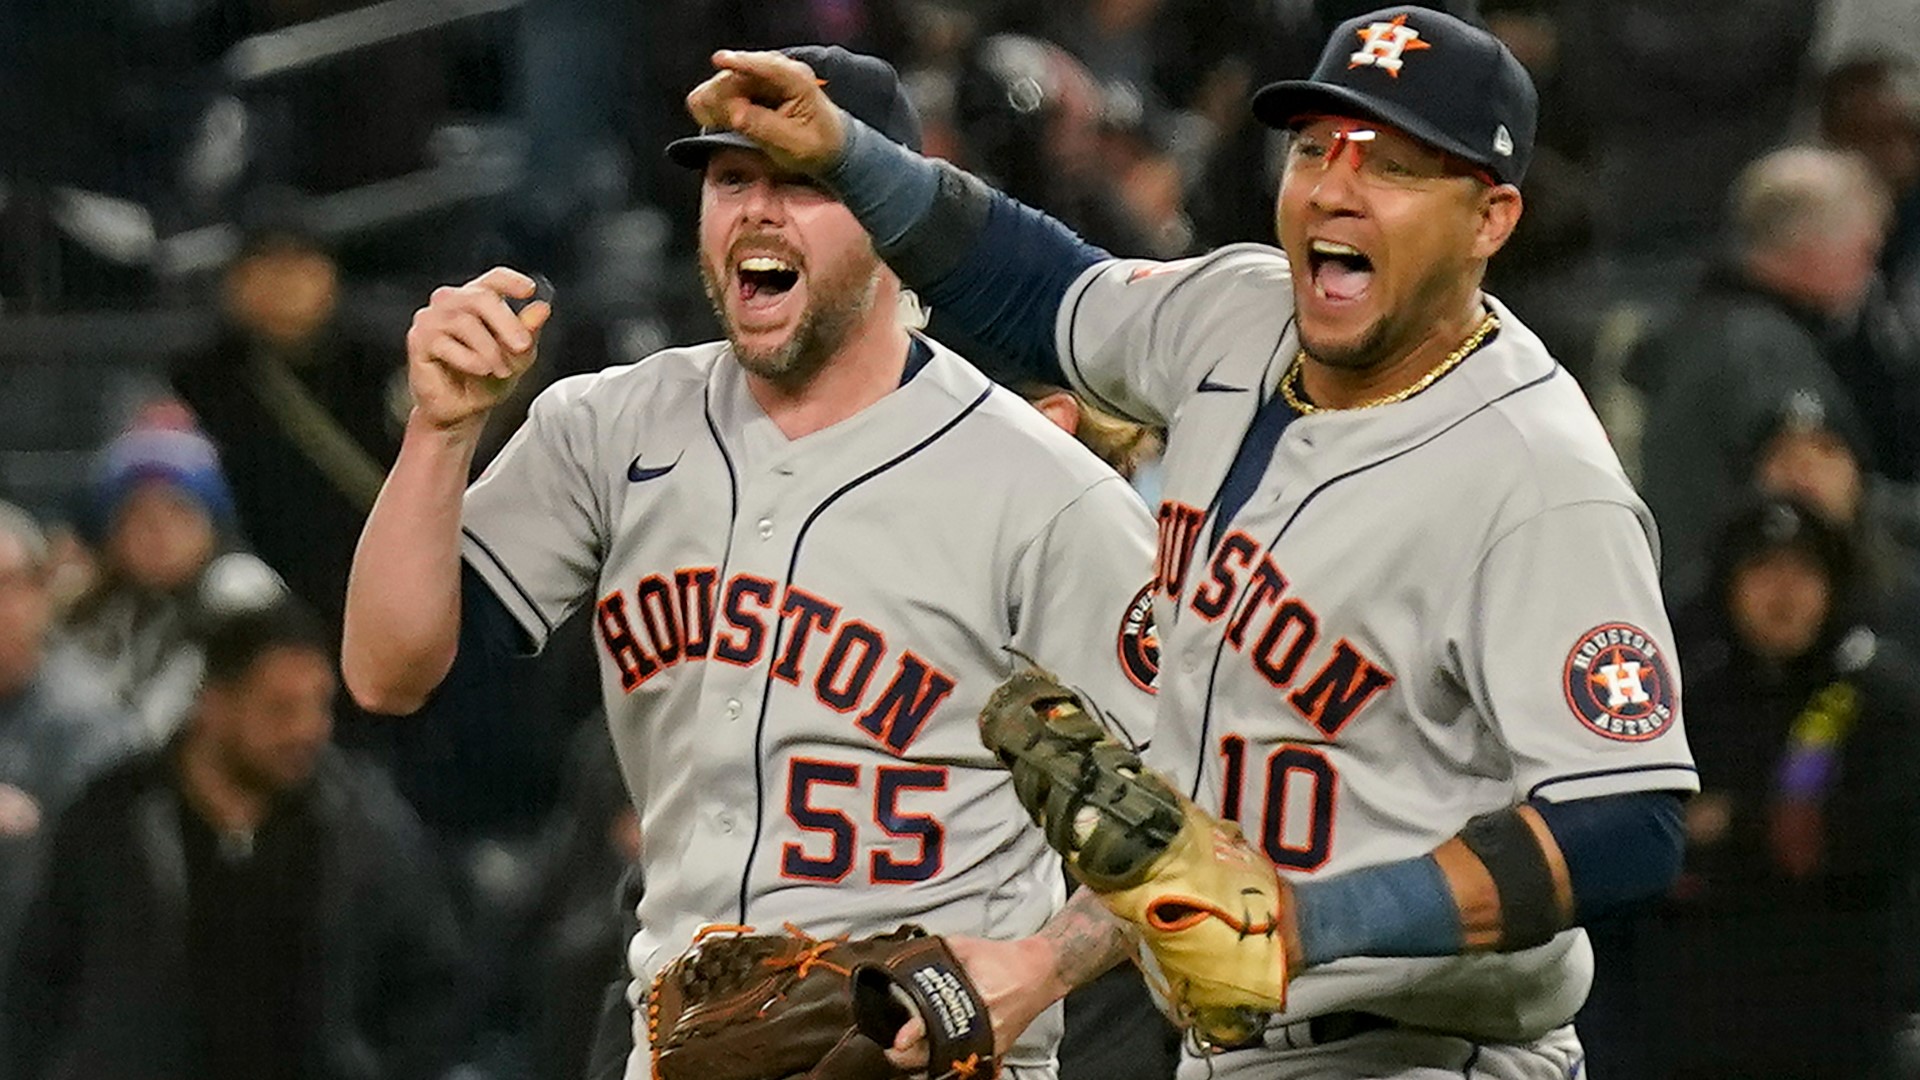 Jason Bristol and Jeremy Booth break down an ALCS Game 4 win and sweep of the New York Yankees.